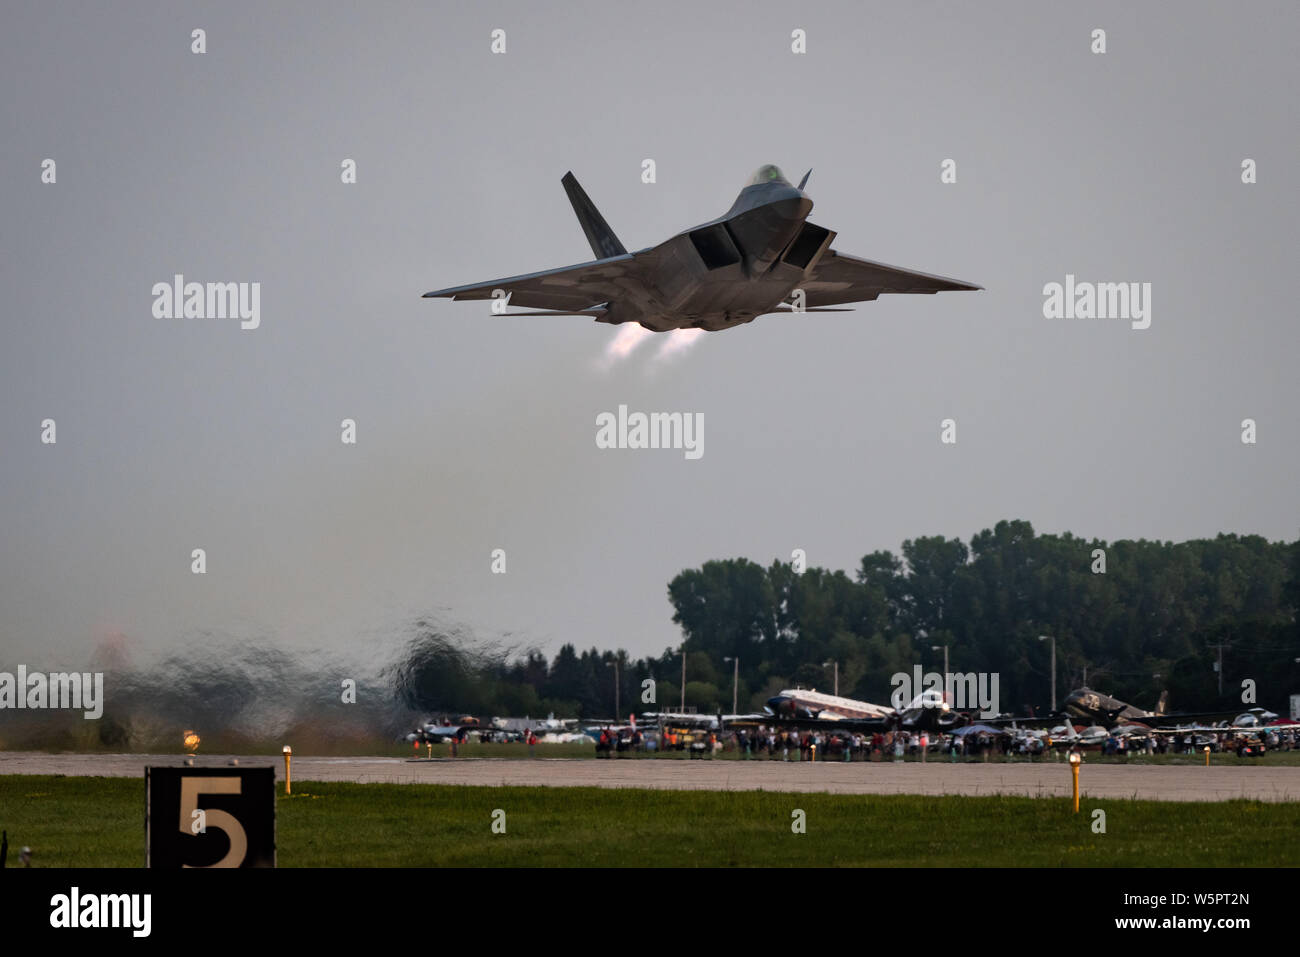 U.S. Air Force Maj. Paul Lopez, F-22 Demo Team commander, performs a twilight demonstration during EAA AirVenture in Oshkosh, Wis., July 28, 2019. Representing the U.S. Air Force and Air Combat Command, the F-22 Demo Team travels to over 20 air shows a season to showcase the performance and capabilities of the world's premier 5th-generation fighter. (U.S. Air Force photo by 2nd Lt. Samuel Eckholm) Stock Photo